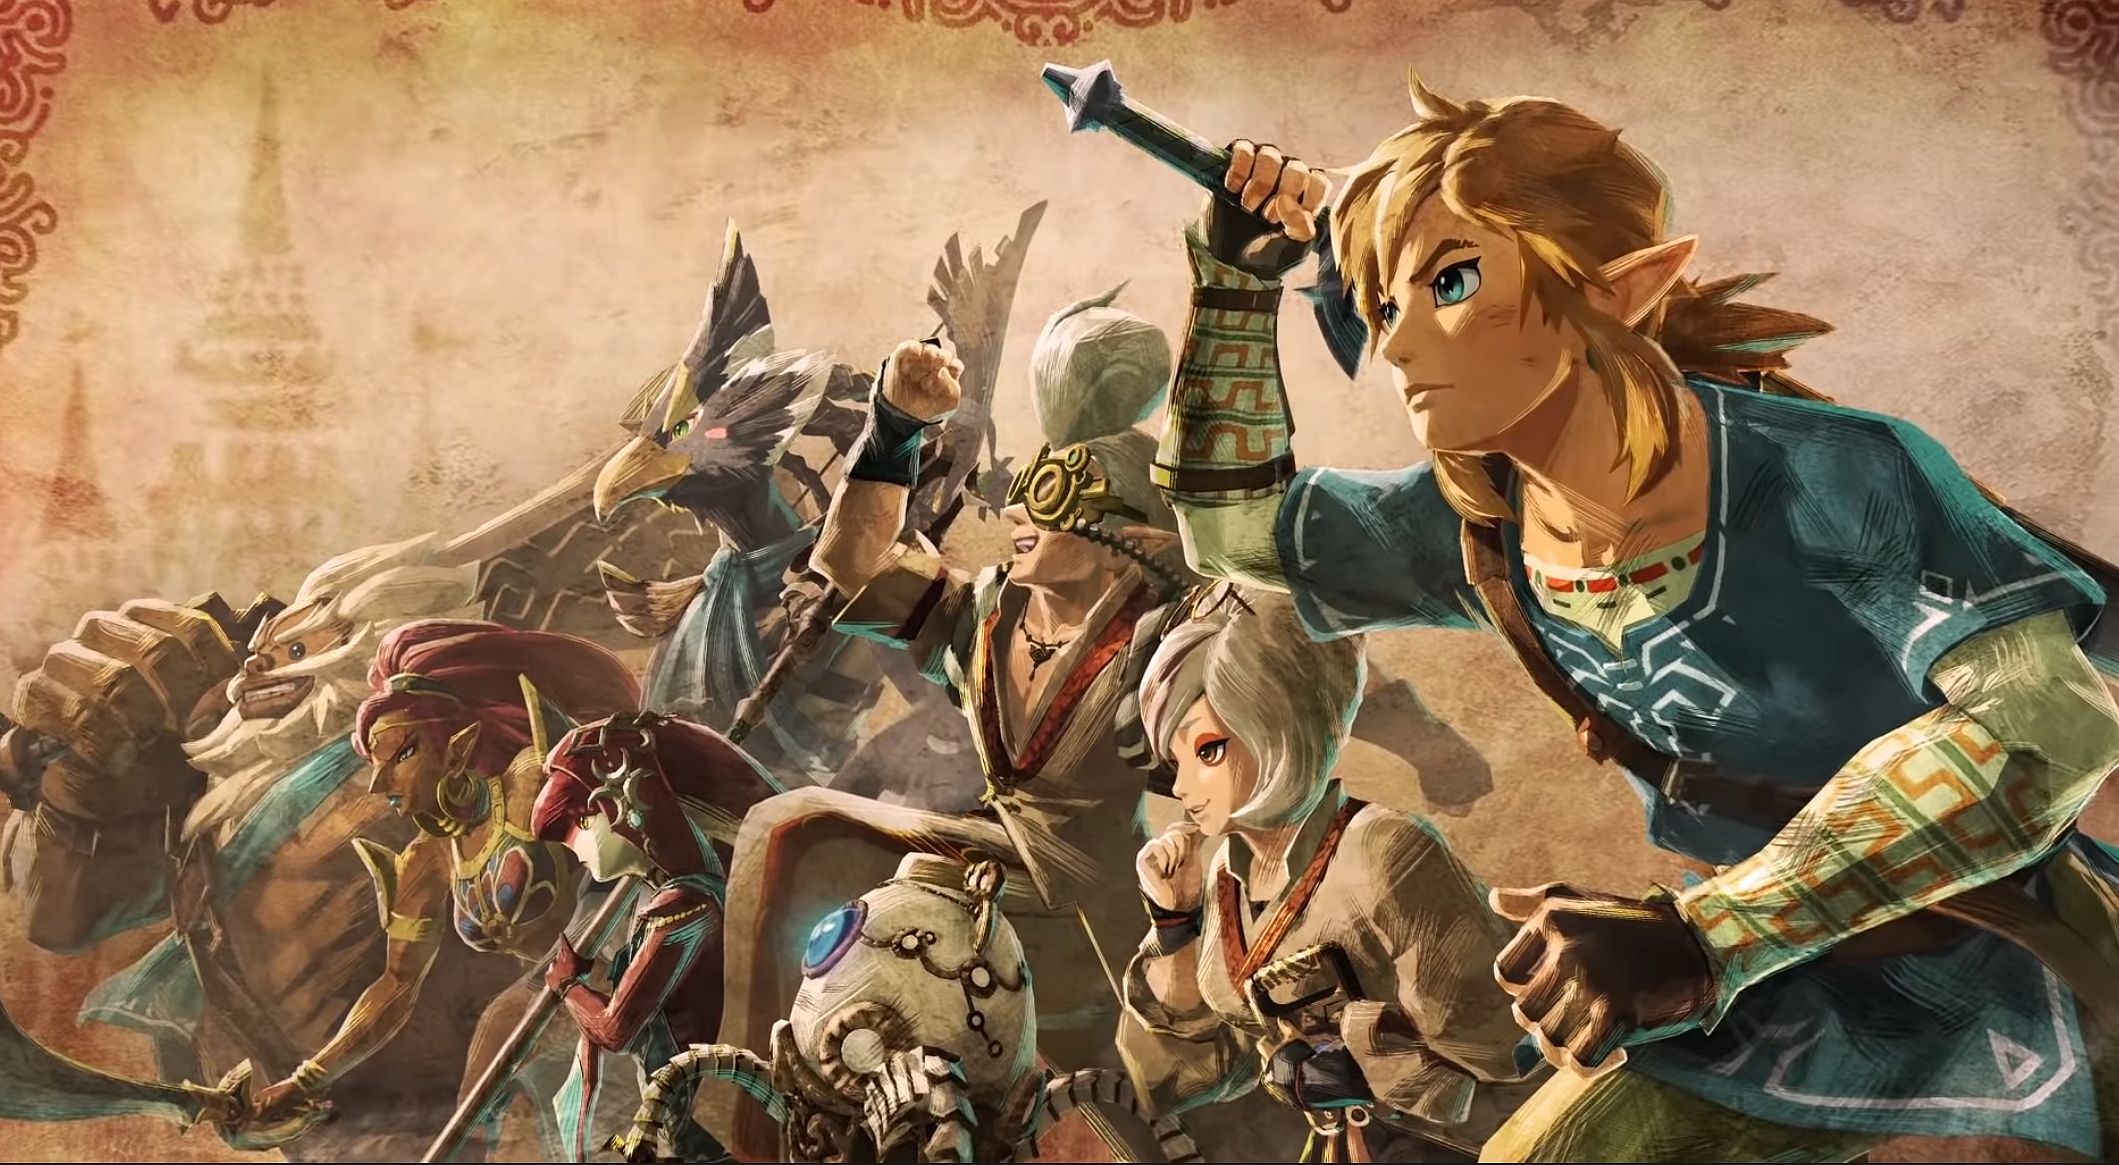 Image for Hyrule Warriors: Age of Calamity Expansion Pass contains new characters, stages, challenges, more